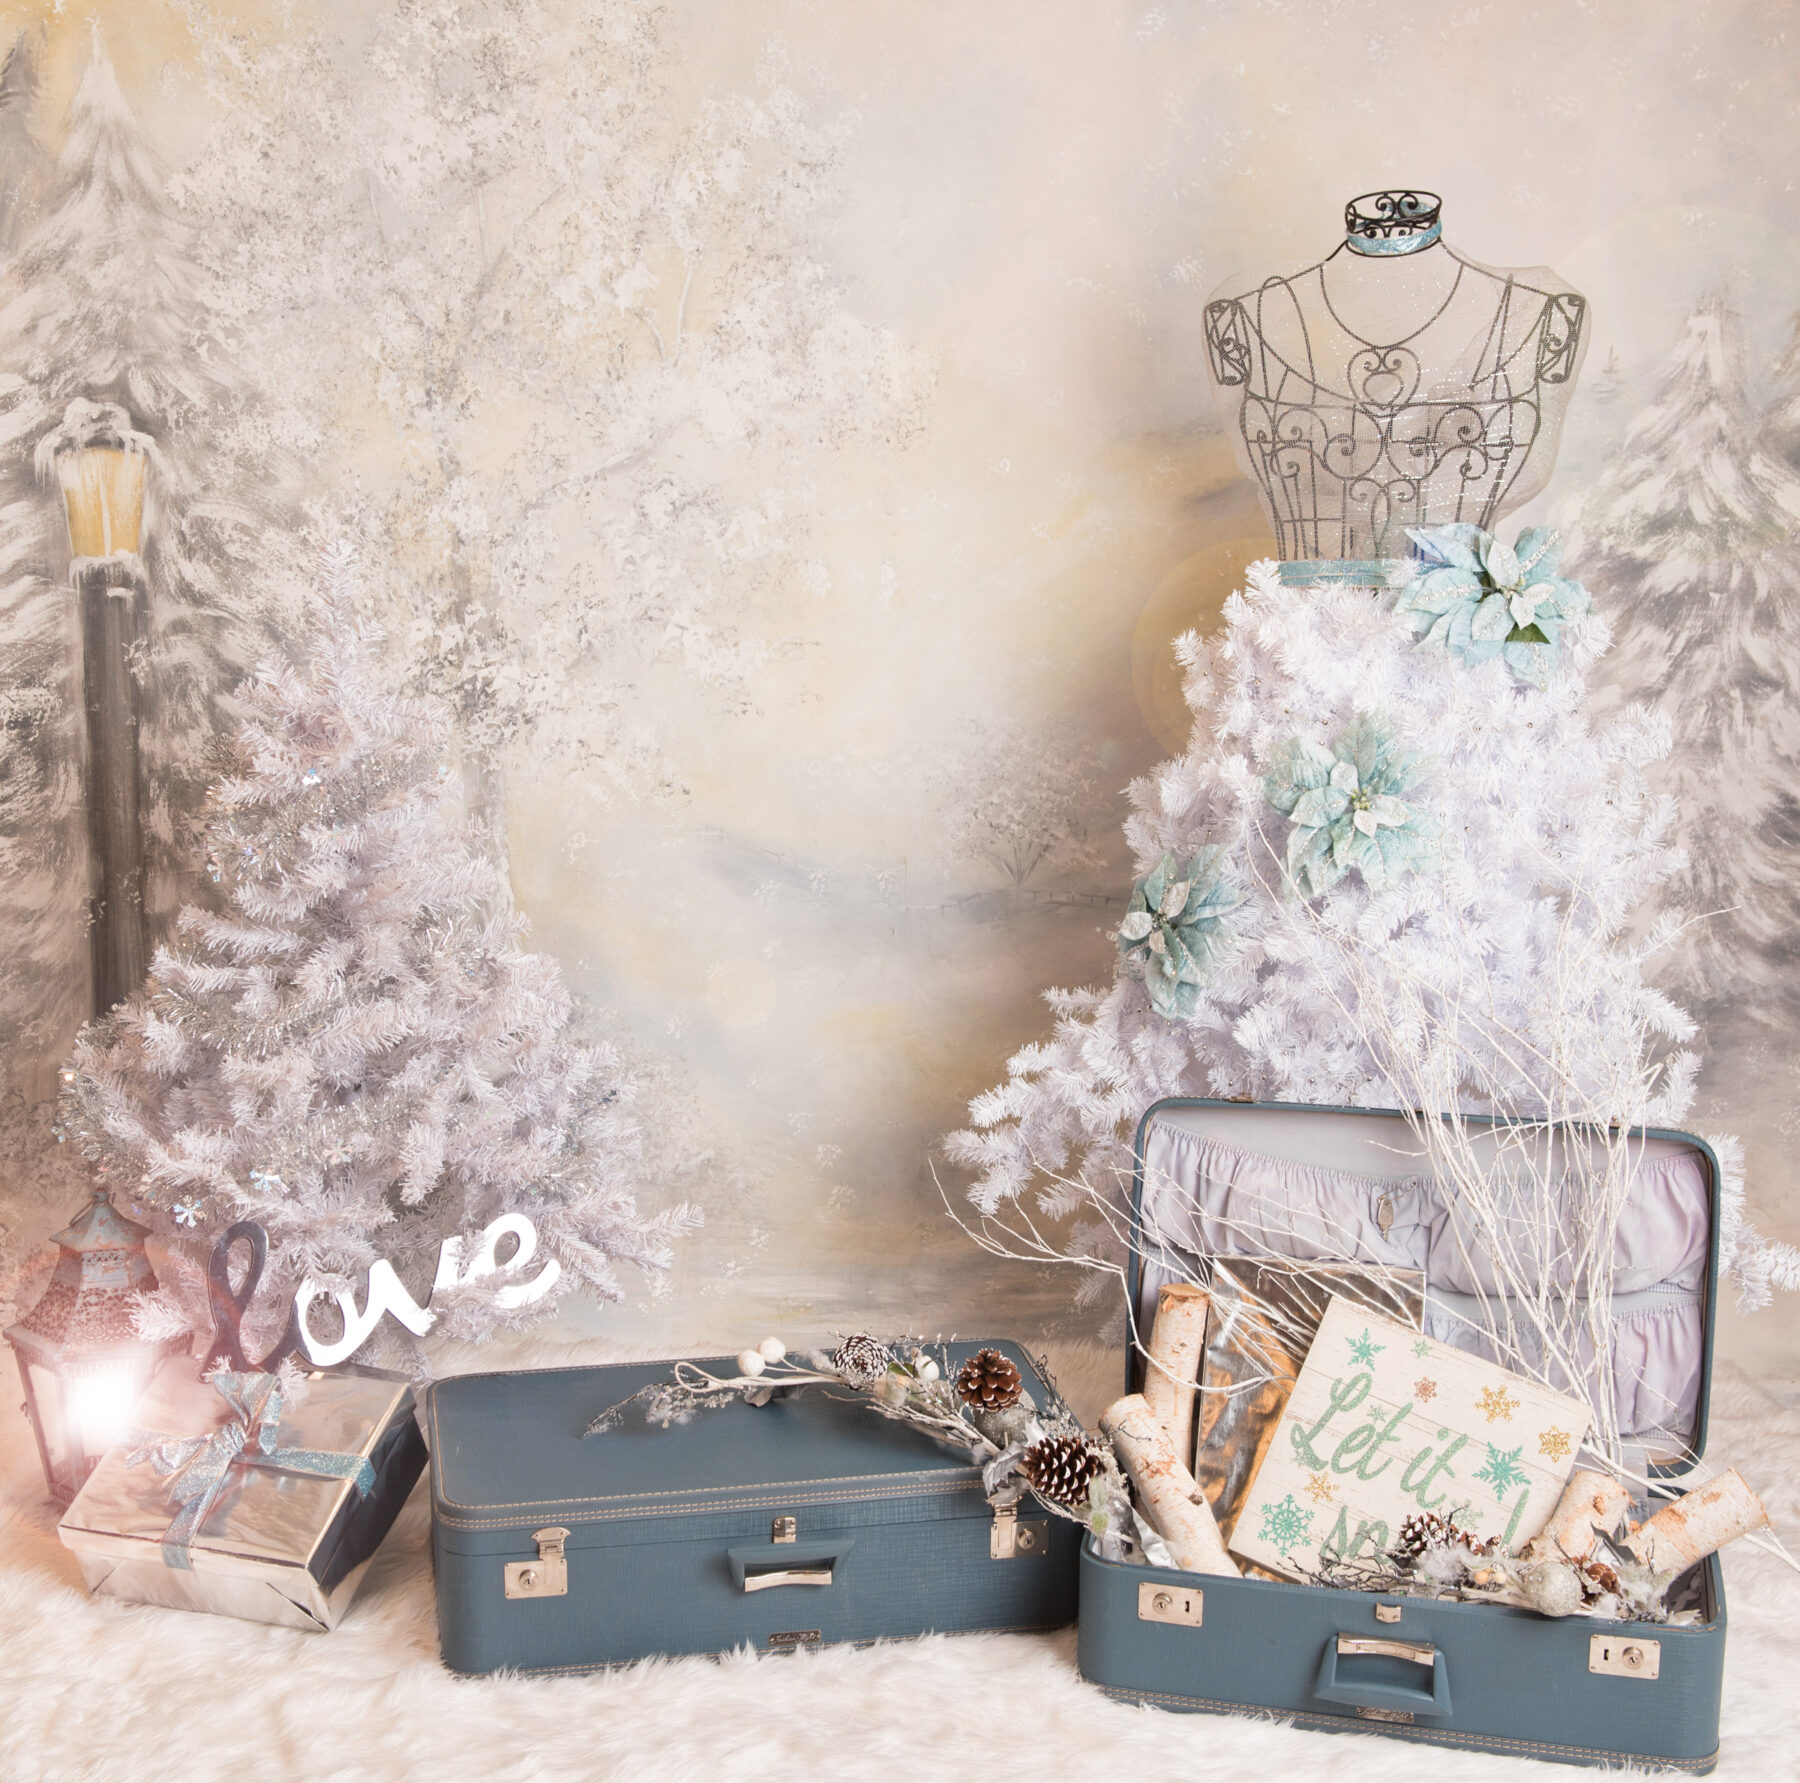 Annual Holiday Portraits – Shabby Chic